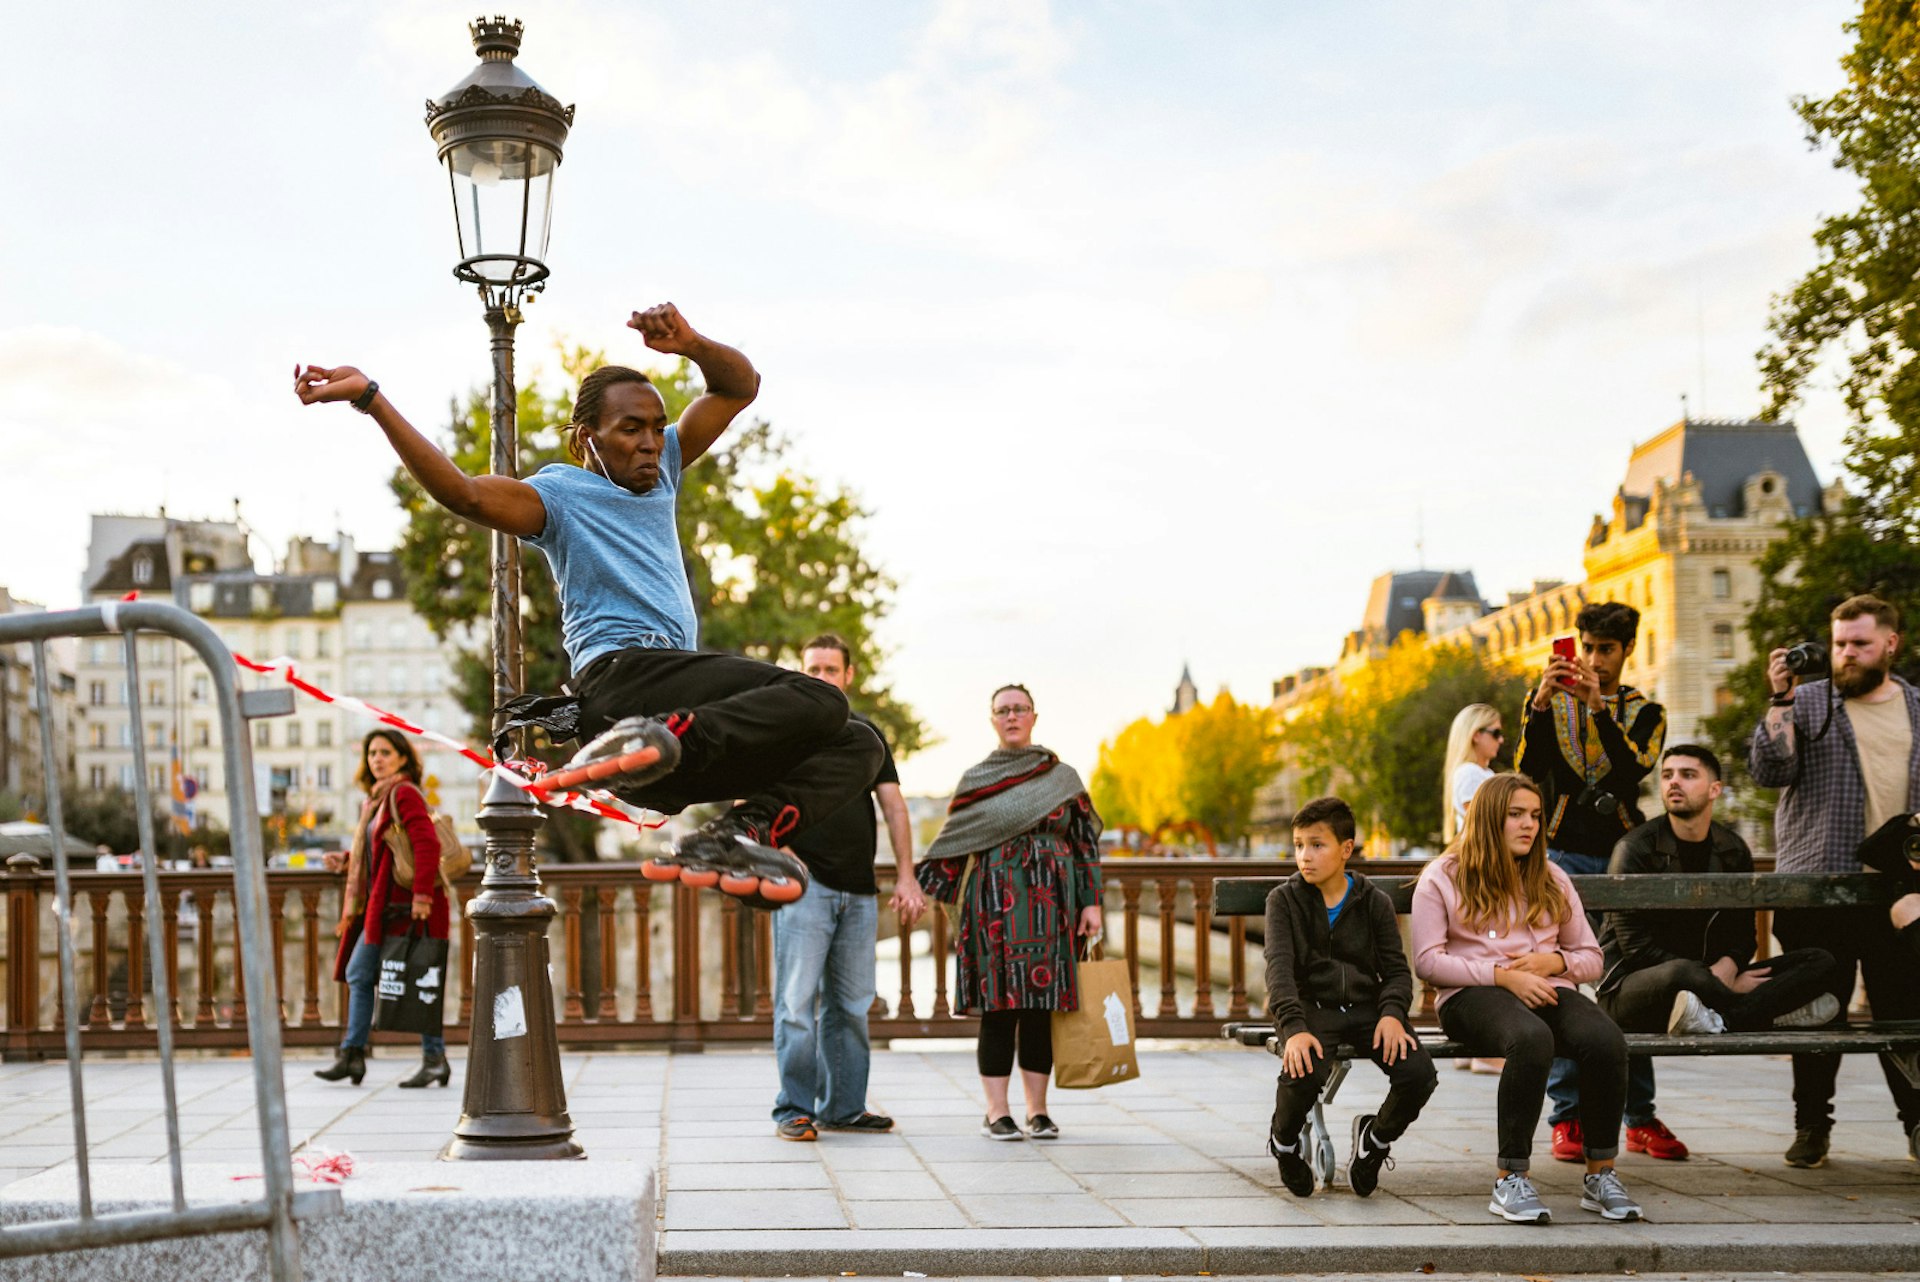 A rollerblader jumps some tape on a bridge over a river in Paris; there is an intricate lamppost behind him, and crowds milling around a bench watching; in the background are trees and a handsome building.